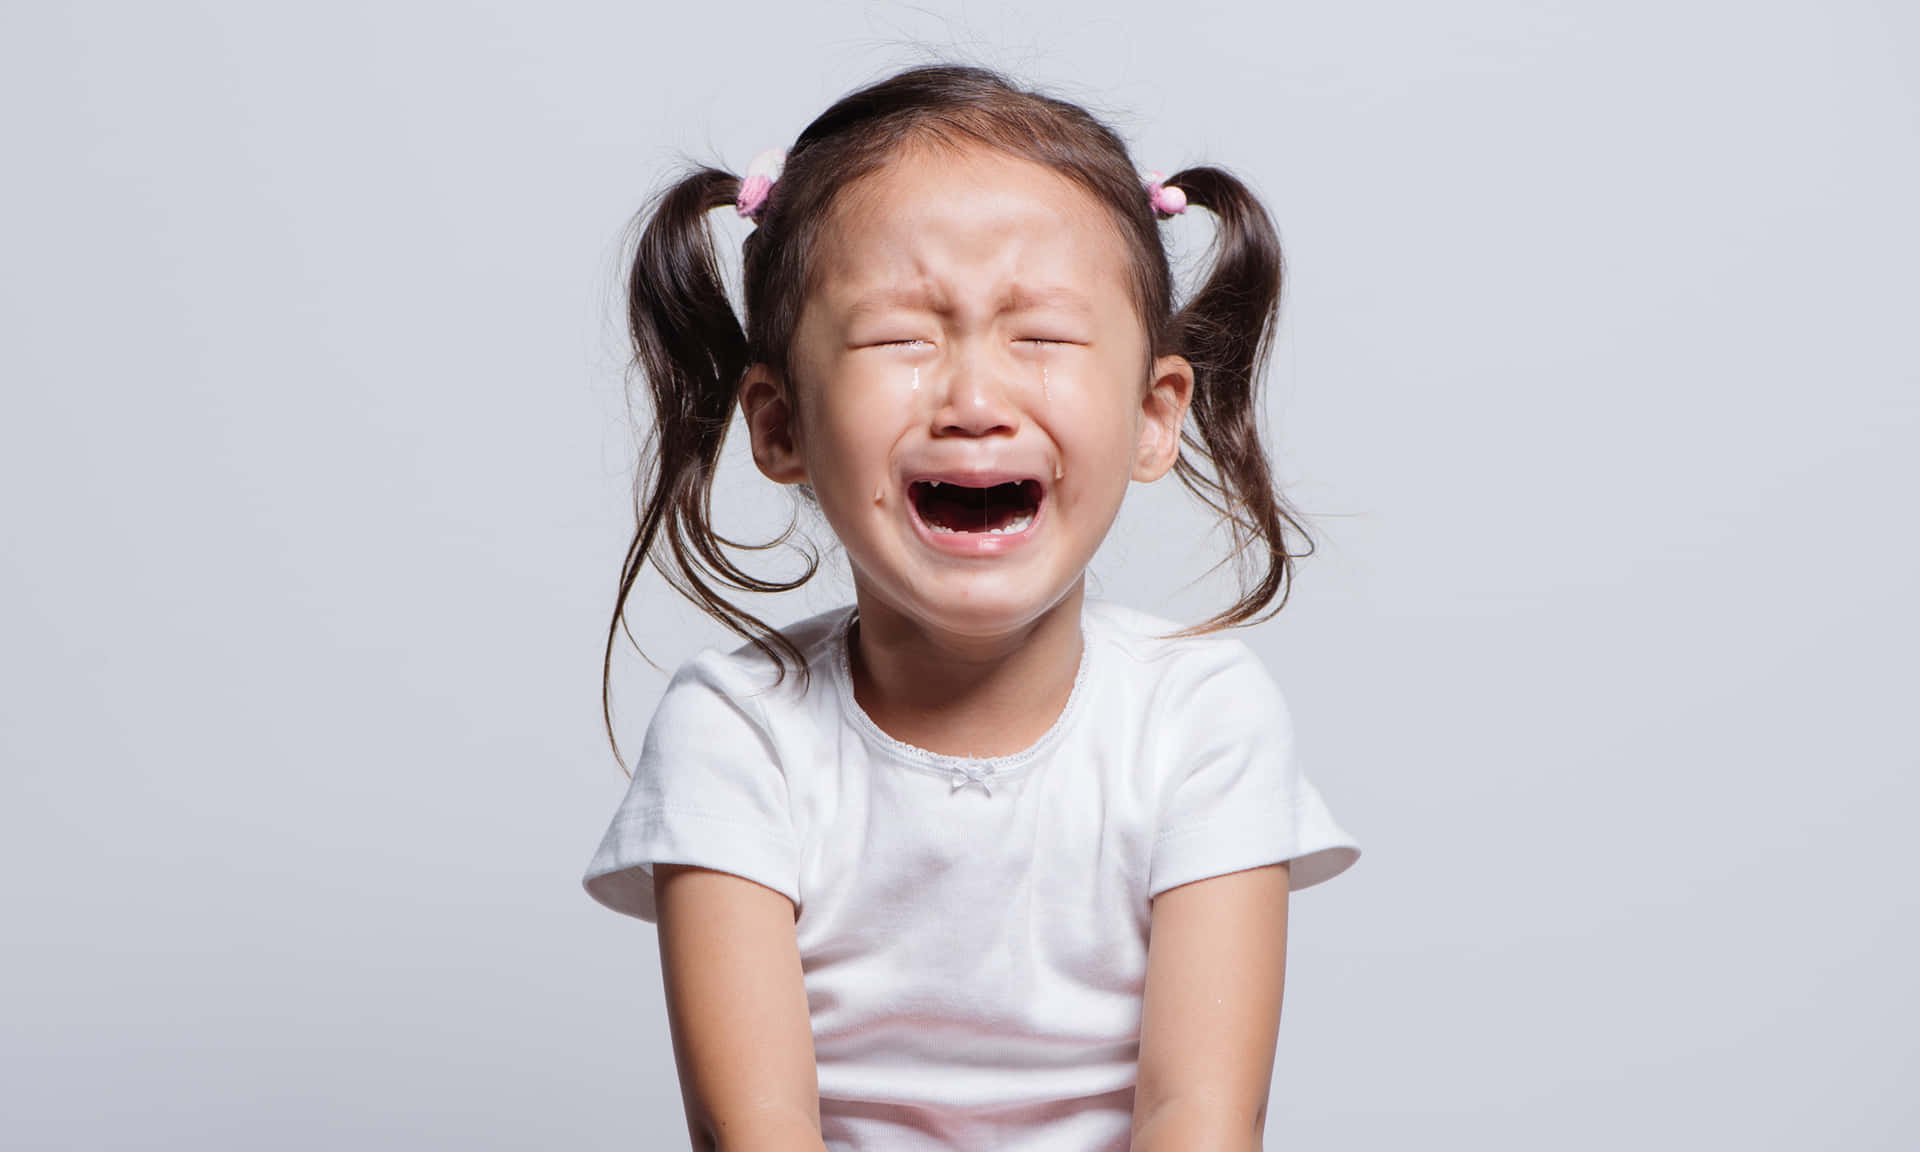 A Little Girl Is Crying On A Gray Background